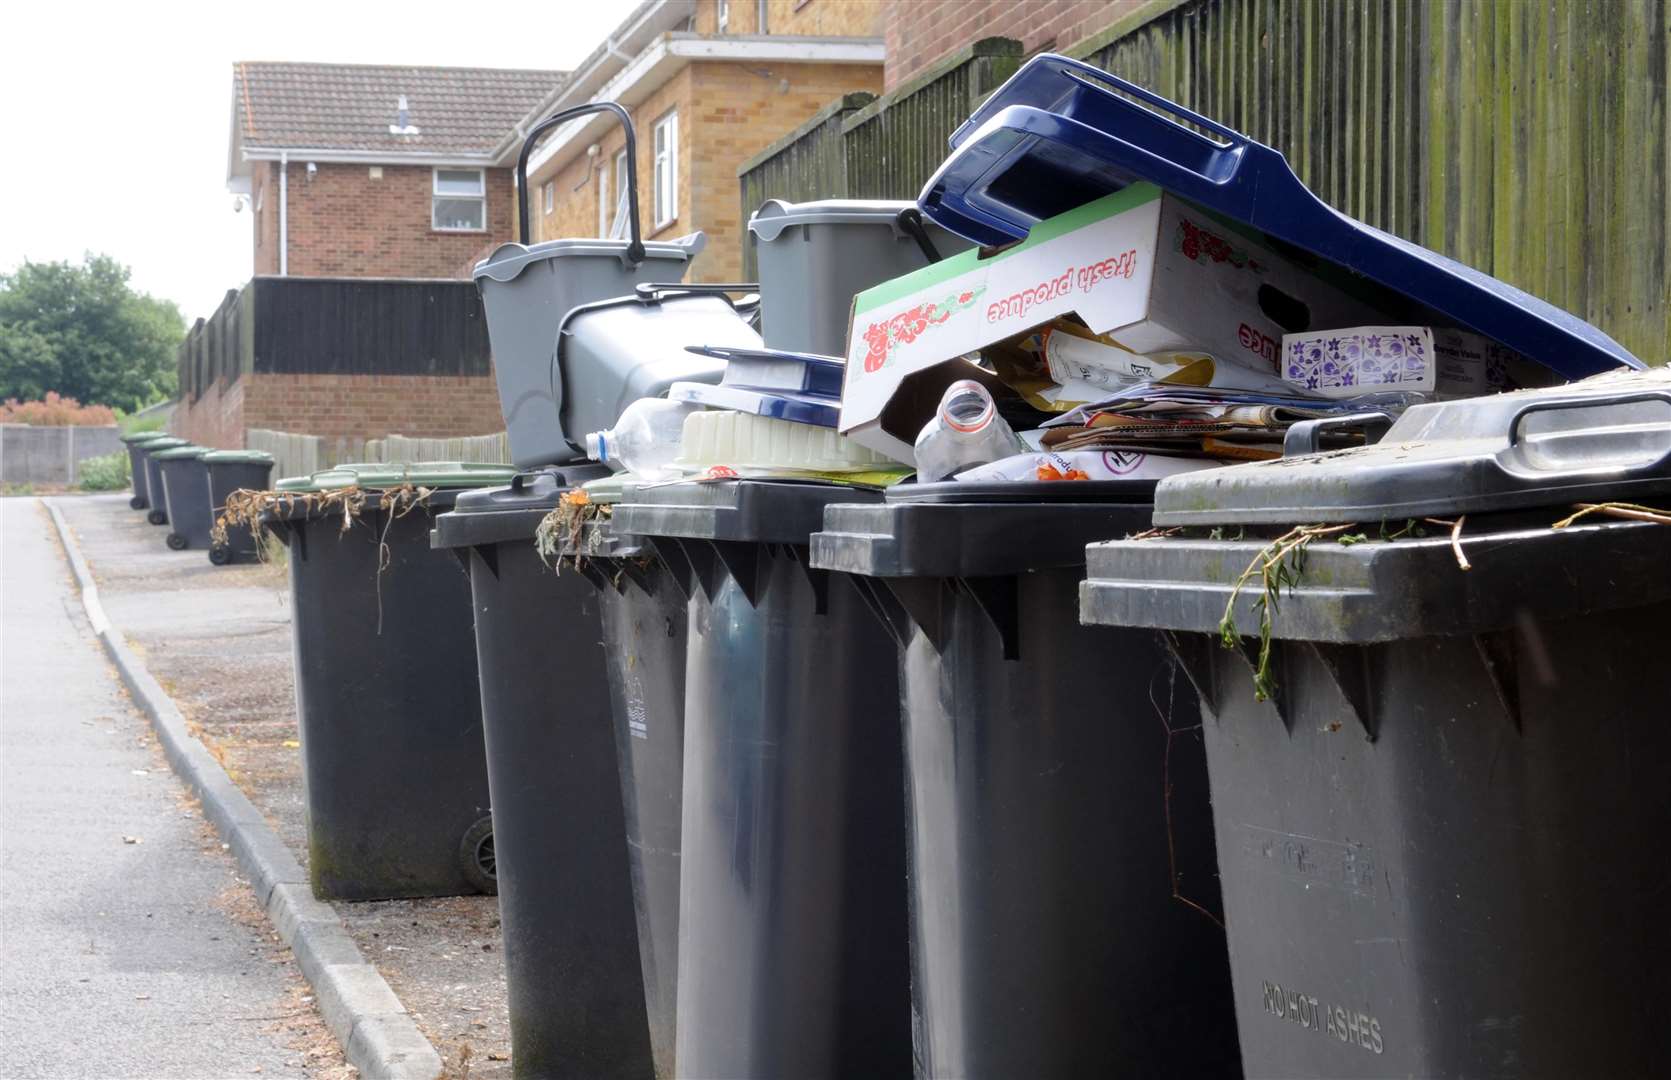 The threat of bin strikes looms in the district